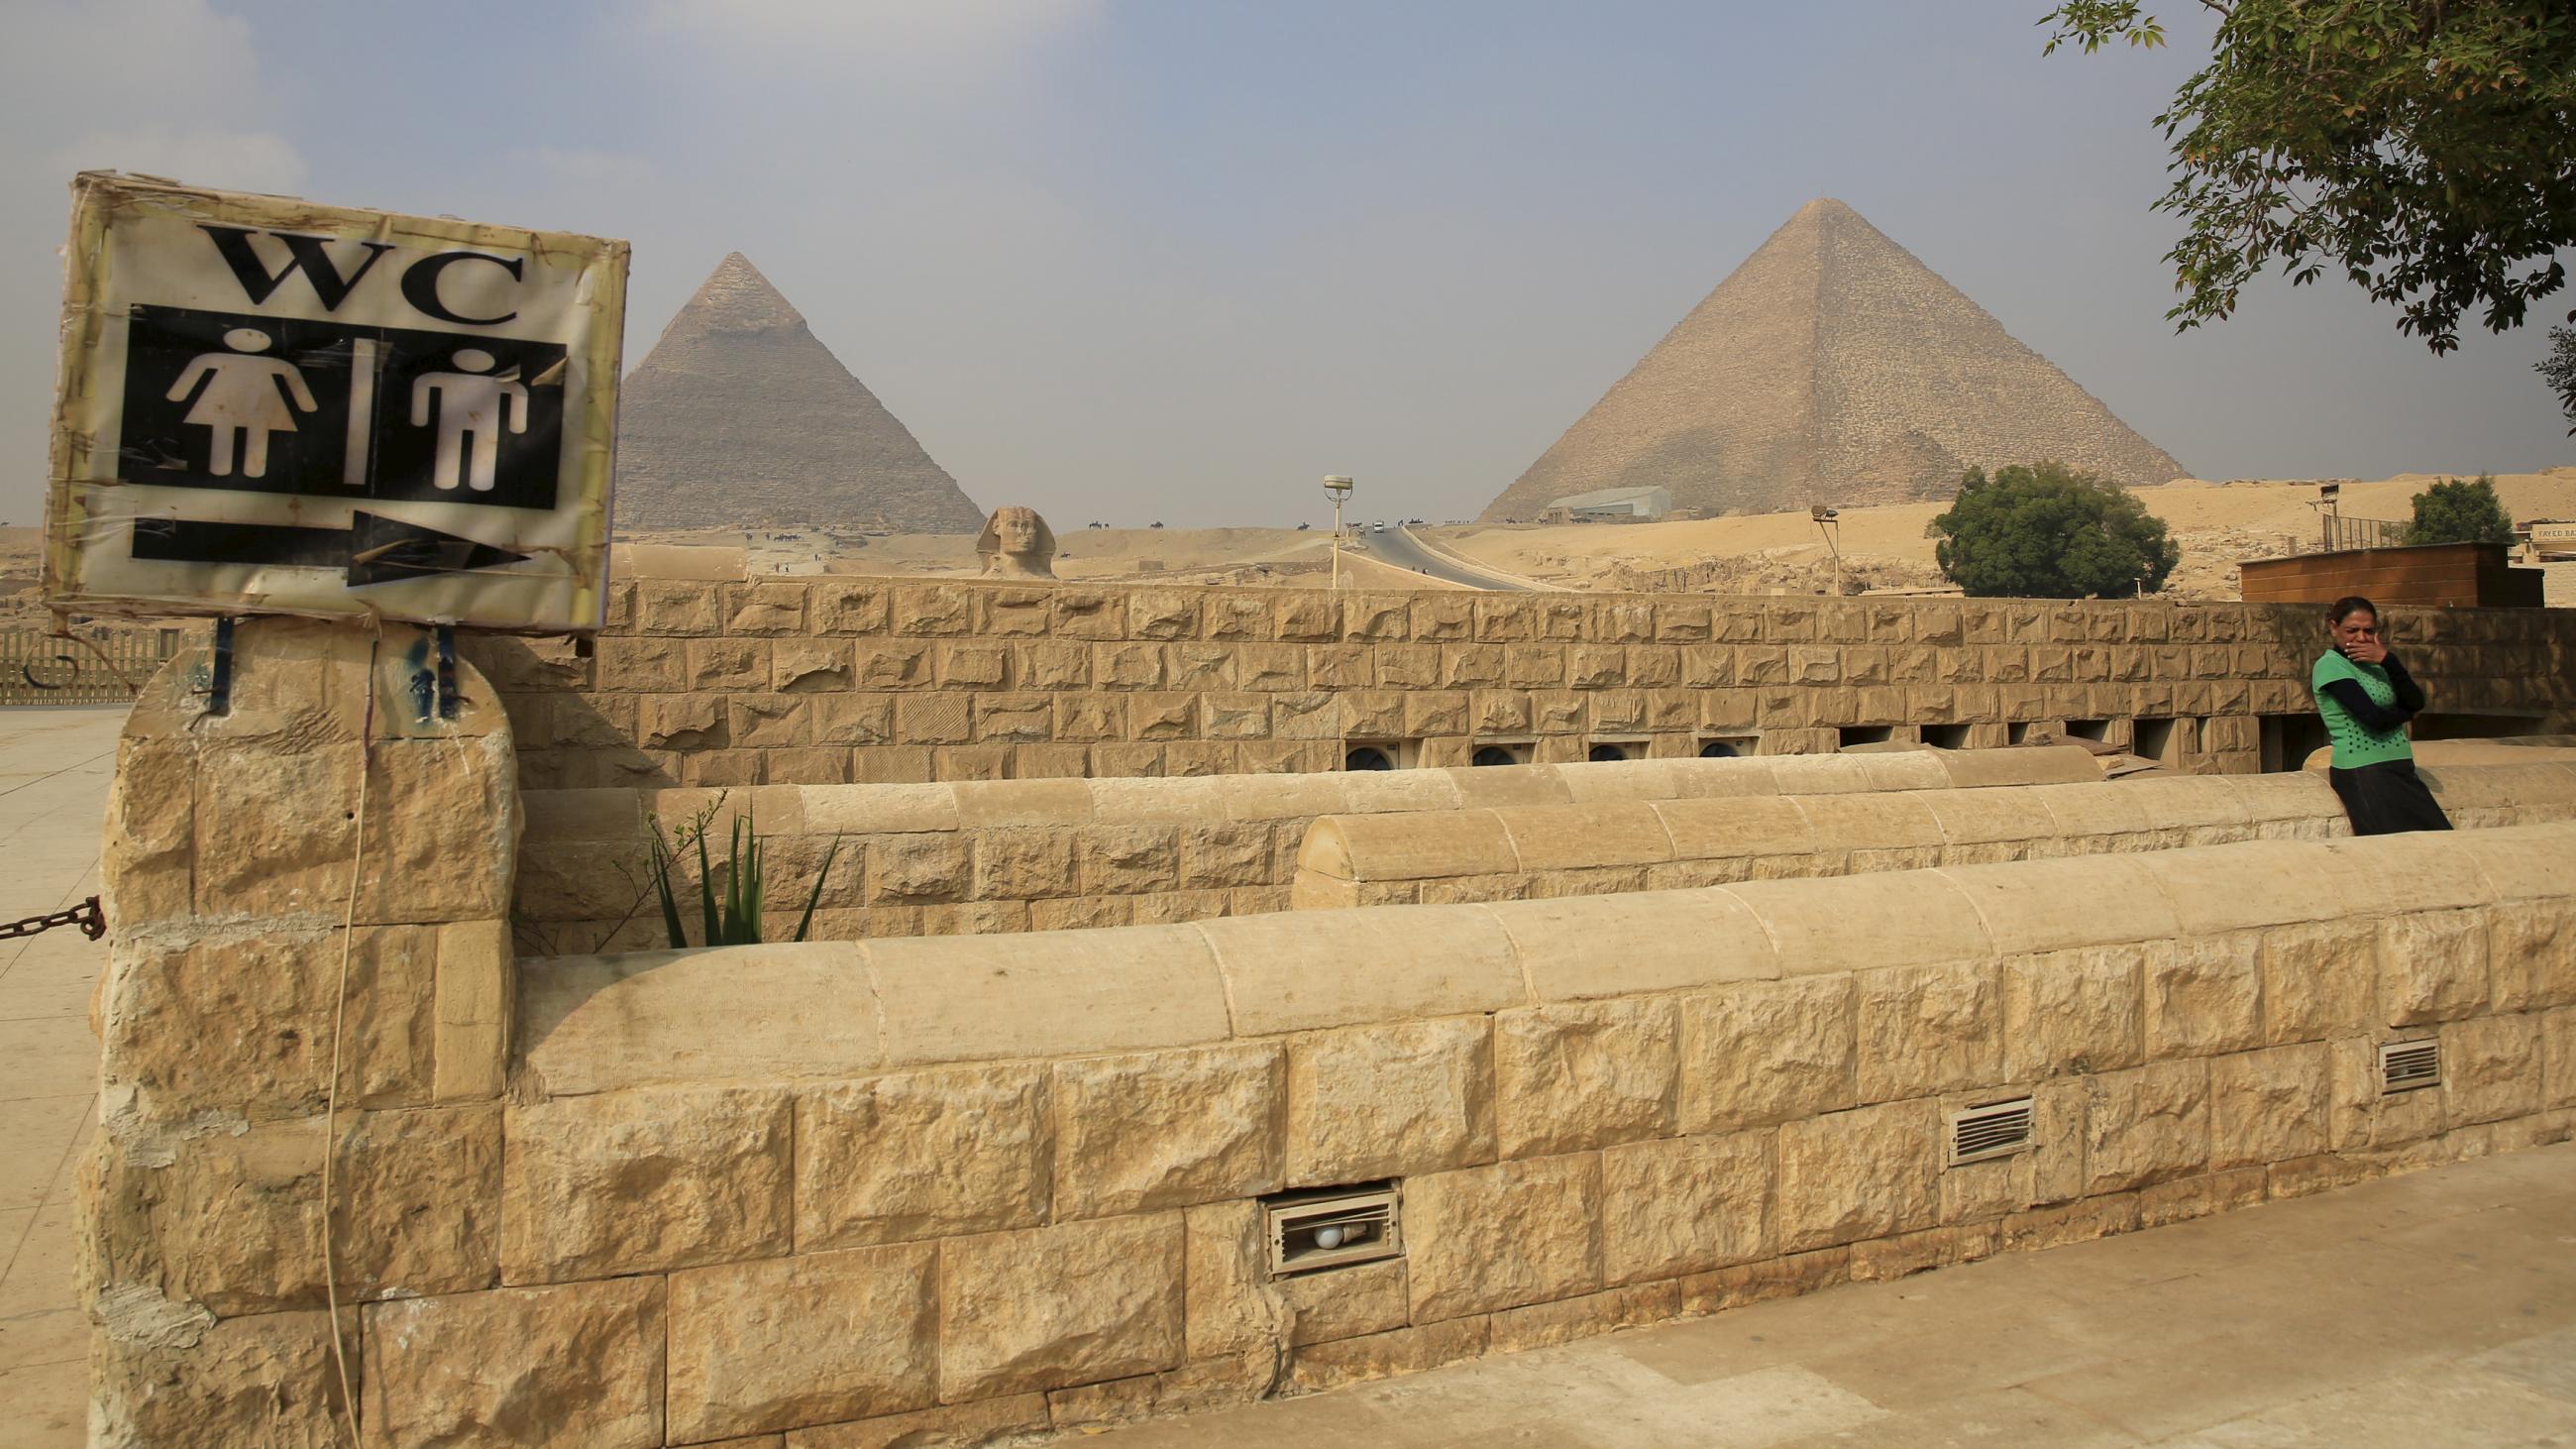 A woman waits in front of a toilet in front of the Sphinx at the Giza Pyramids on the outskirts of Cairo, Egypt, on November 8, 2015.